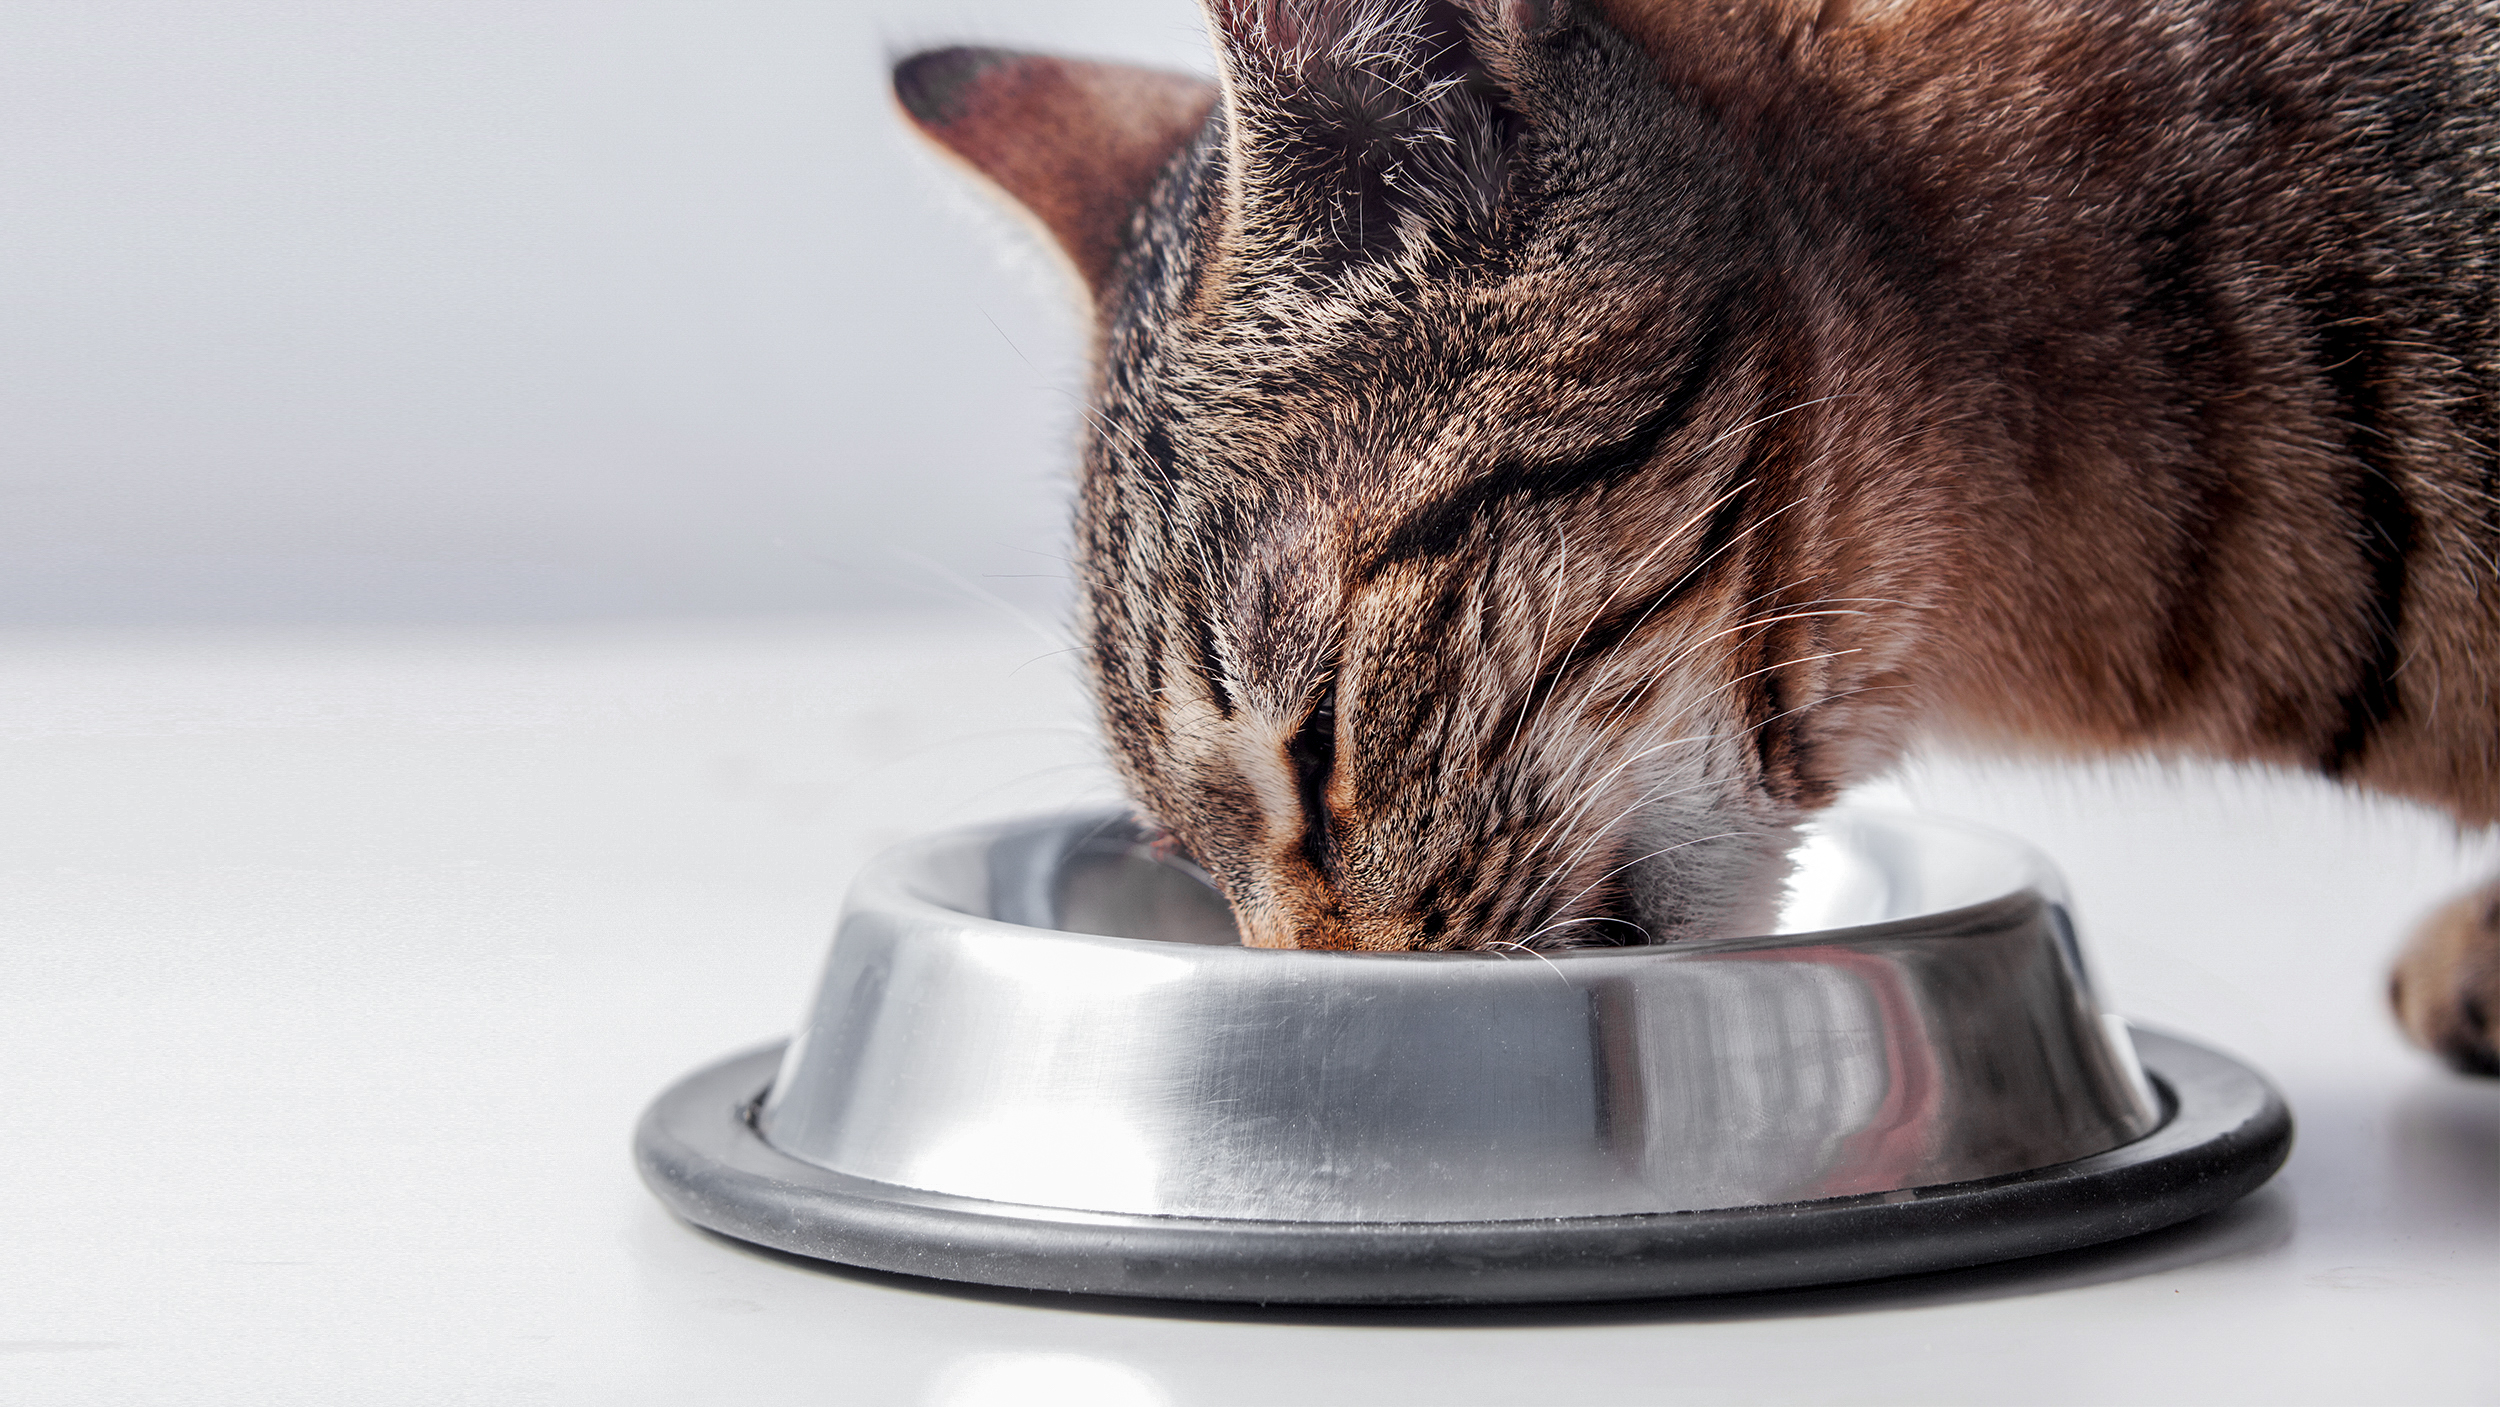 Adult cat standing indoors eating from a silver bowl.